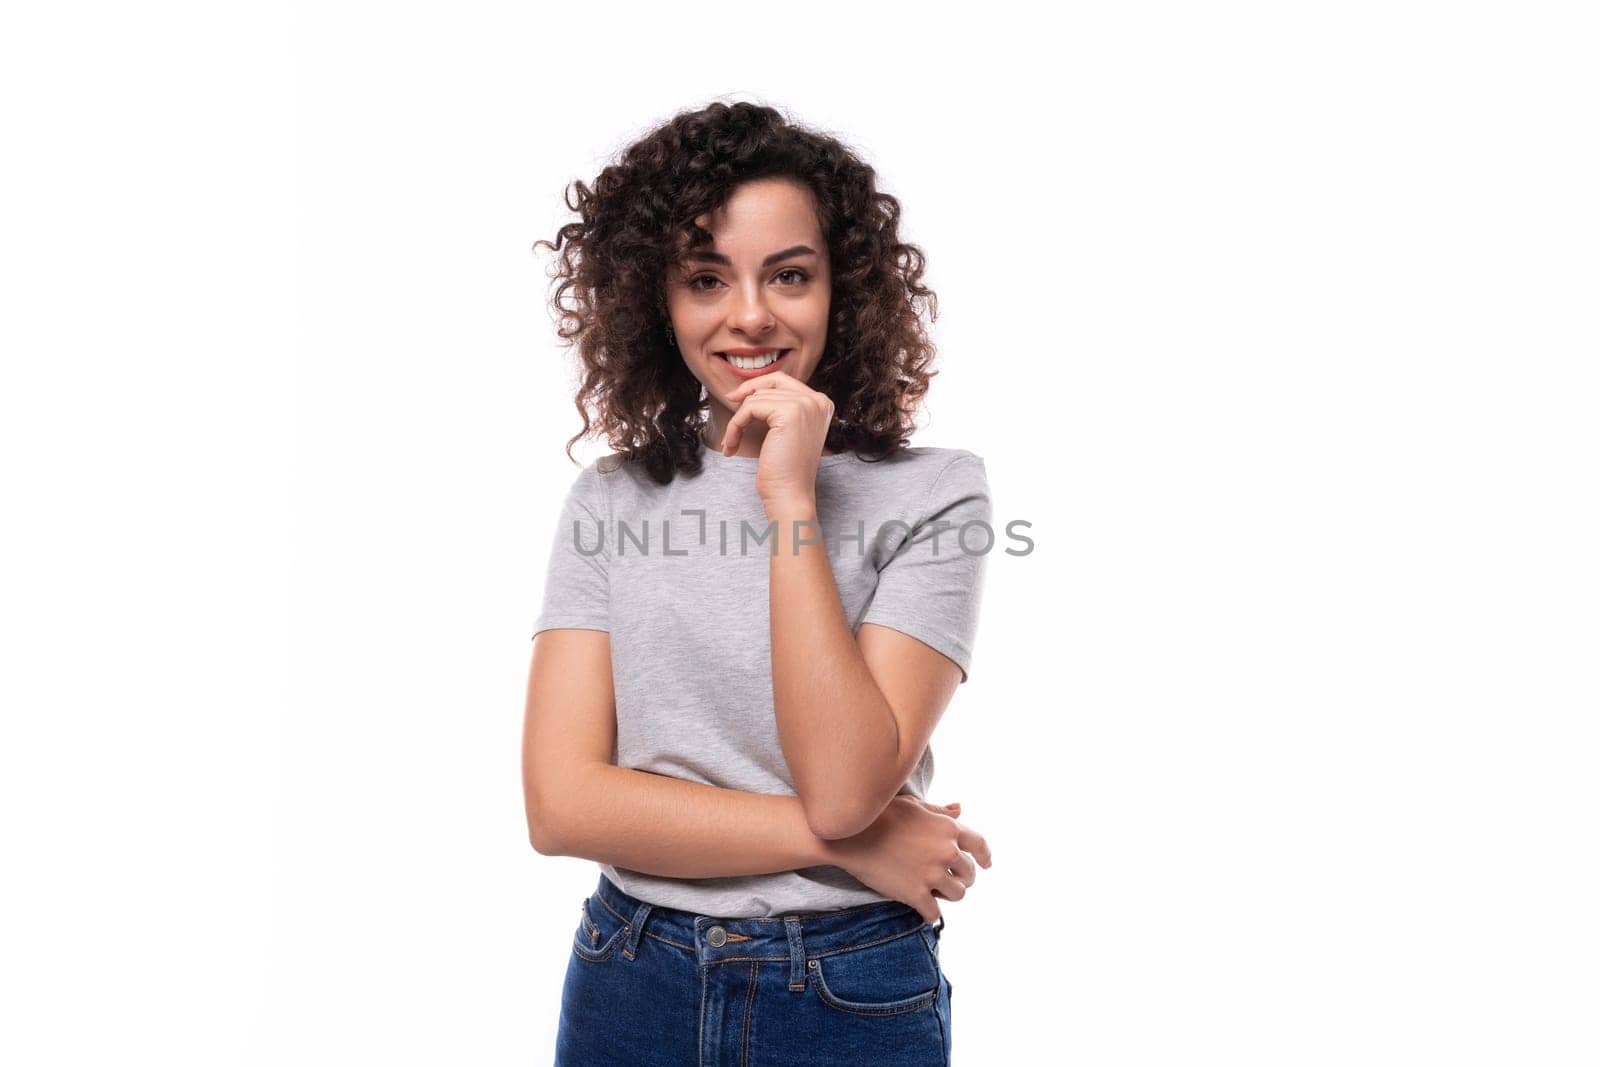 positive confident bright young european slim brunette woman with curly hair style dressed in a gray t-shirt on a white background with copy space.